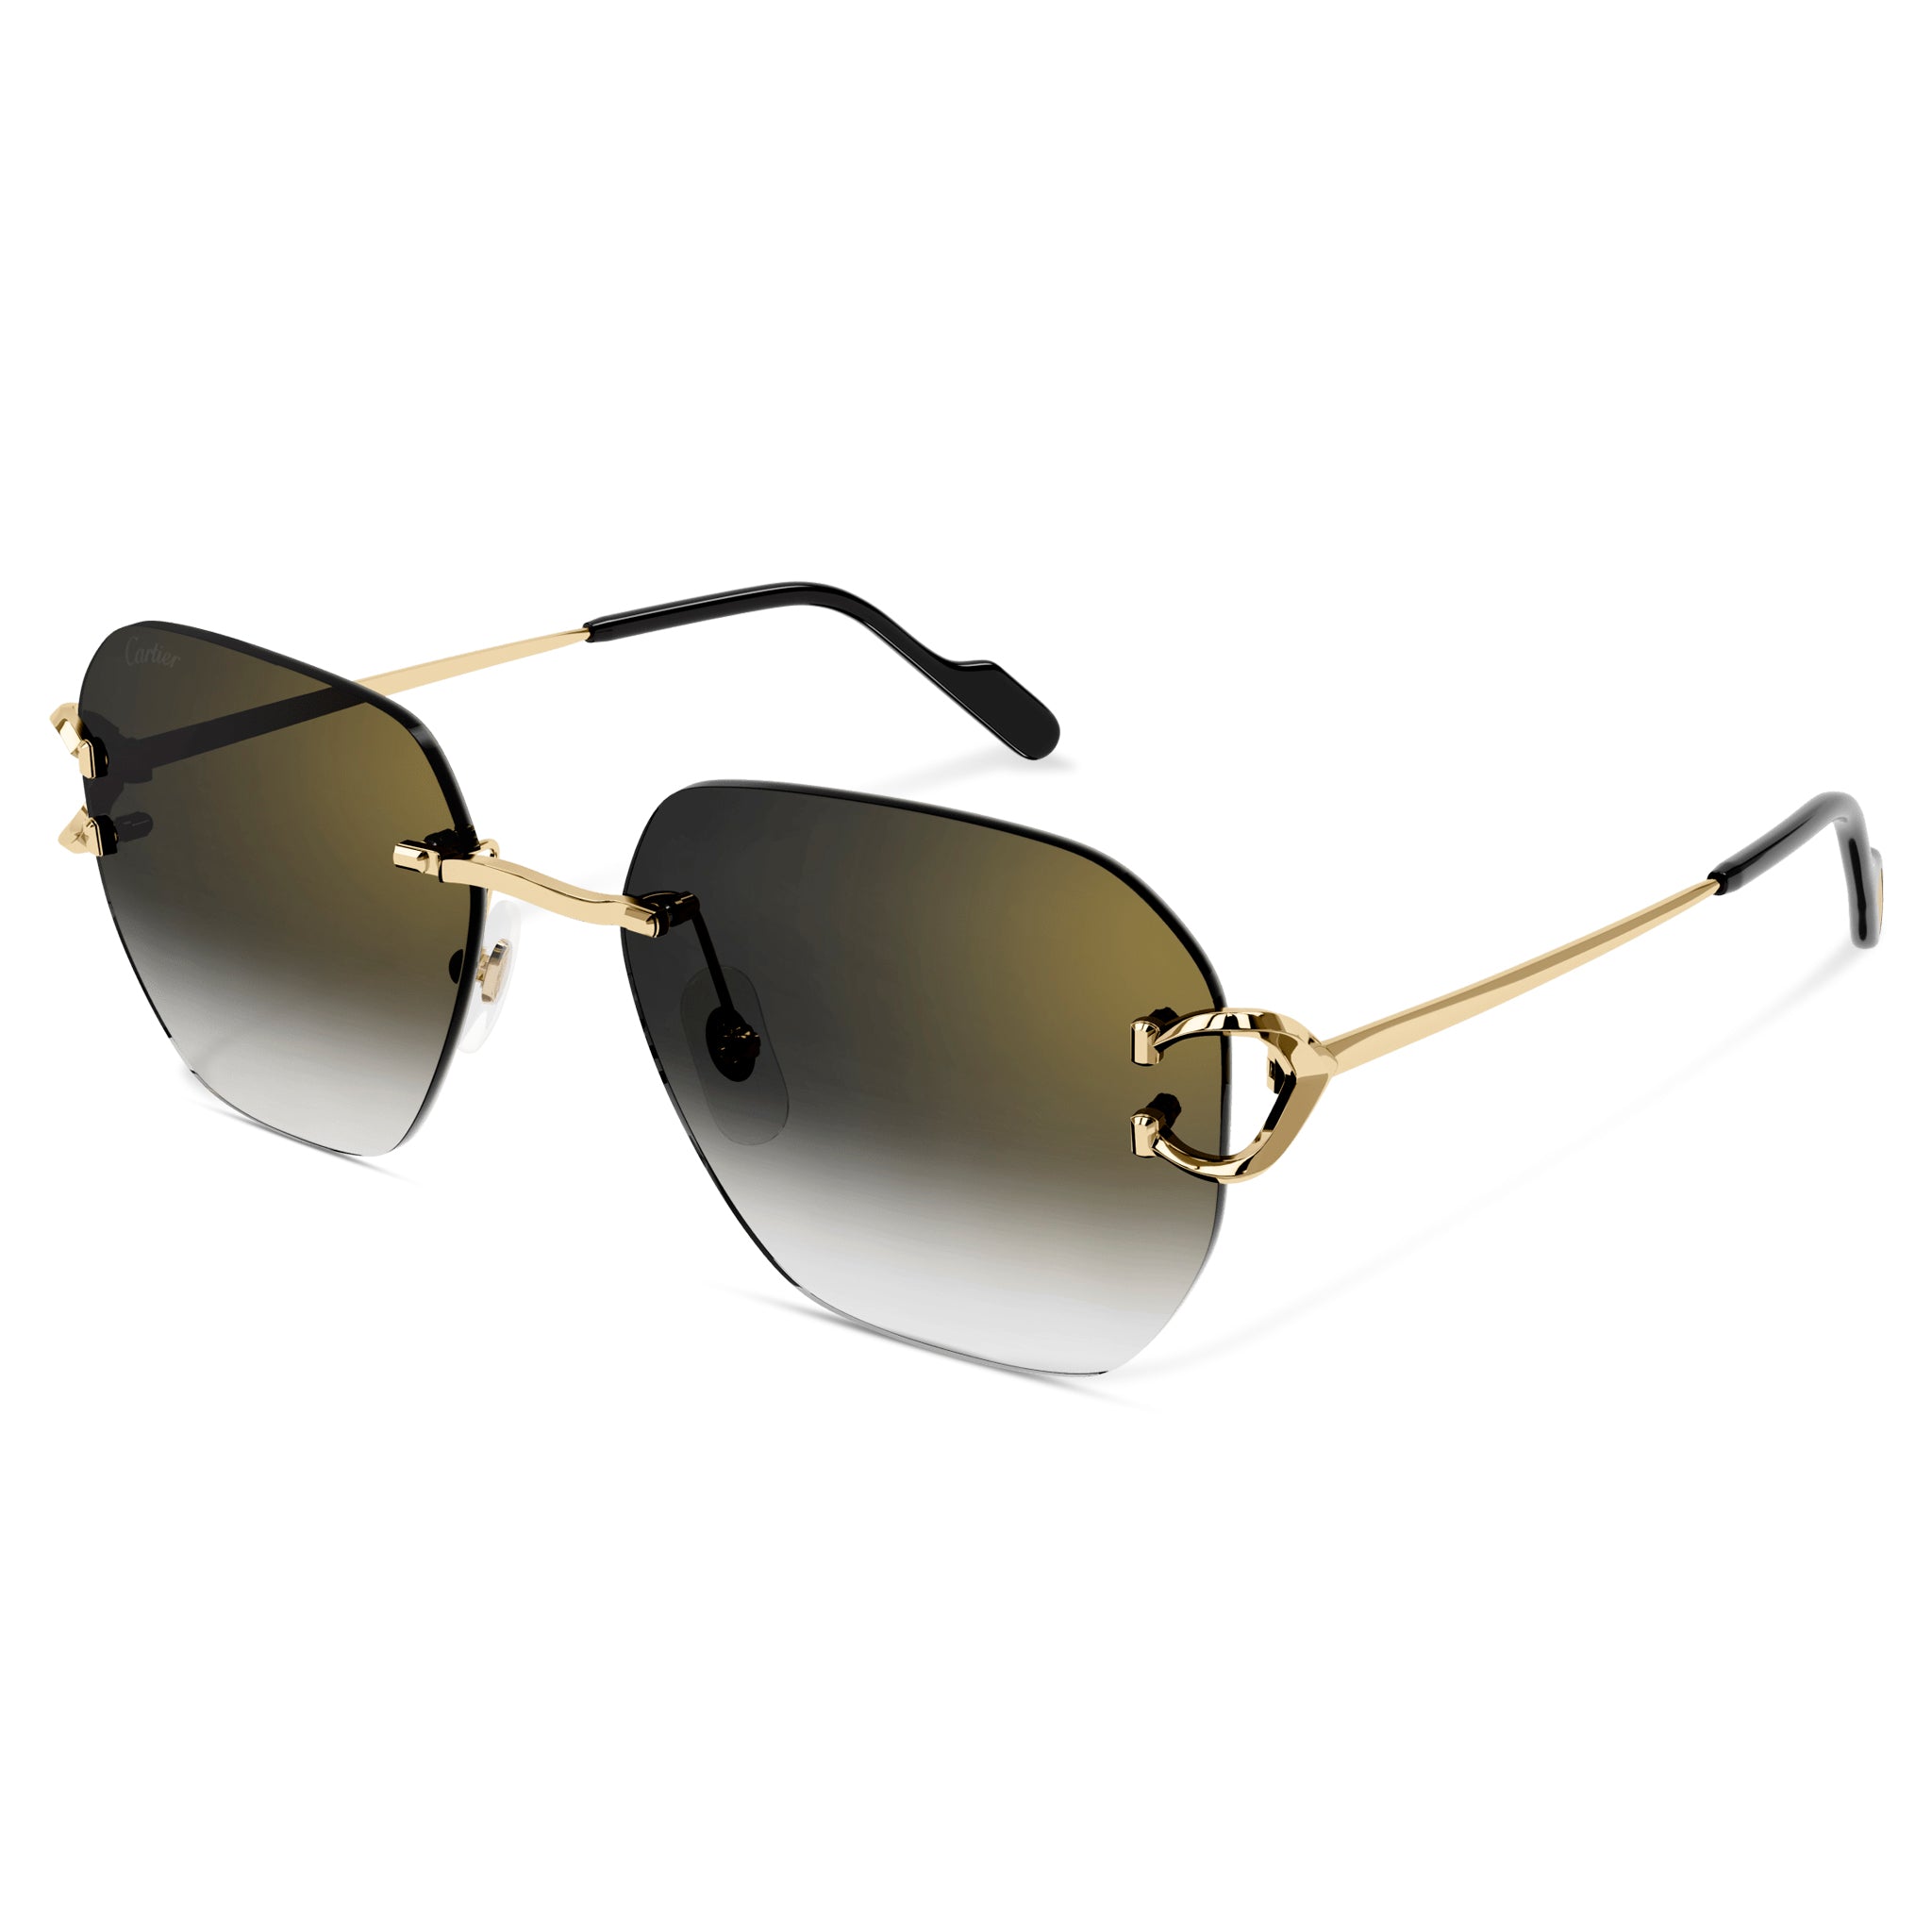 Side view of Cartier Eyewear CT0394S-001 C Decor Gold Grey Rimless Sunglasses